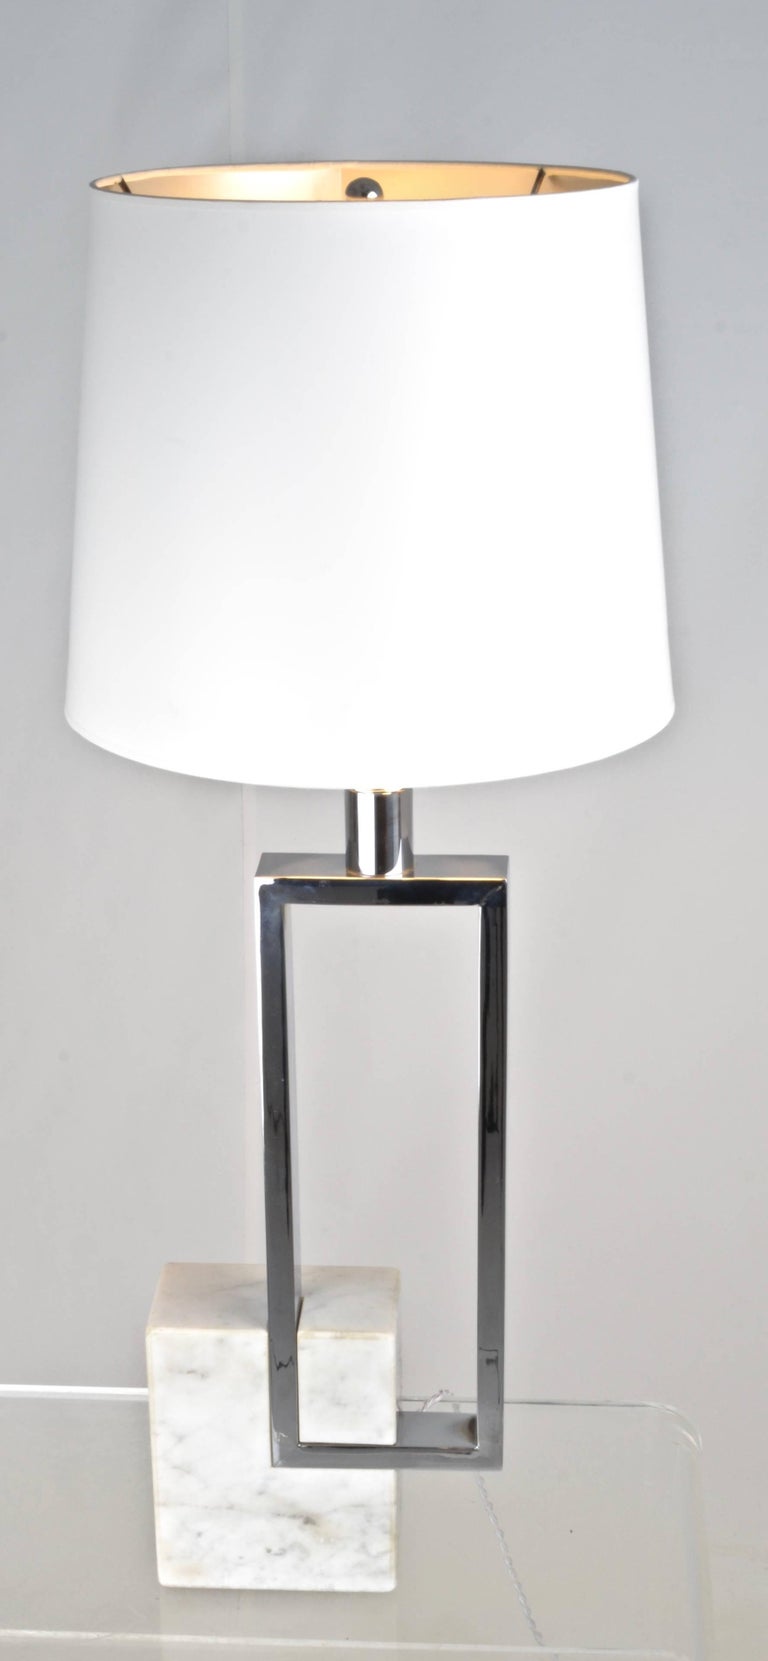 Sculptural lamp with great quality. Heavy chrome and marble. Premium lamp fittings. New wiring. Dimensions of lamp without shade: Depth 3.25 inches, Width 8 inches, Height 31.5 inches. Shade 12 inch diameter, 10 inch height.